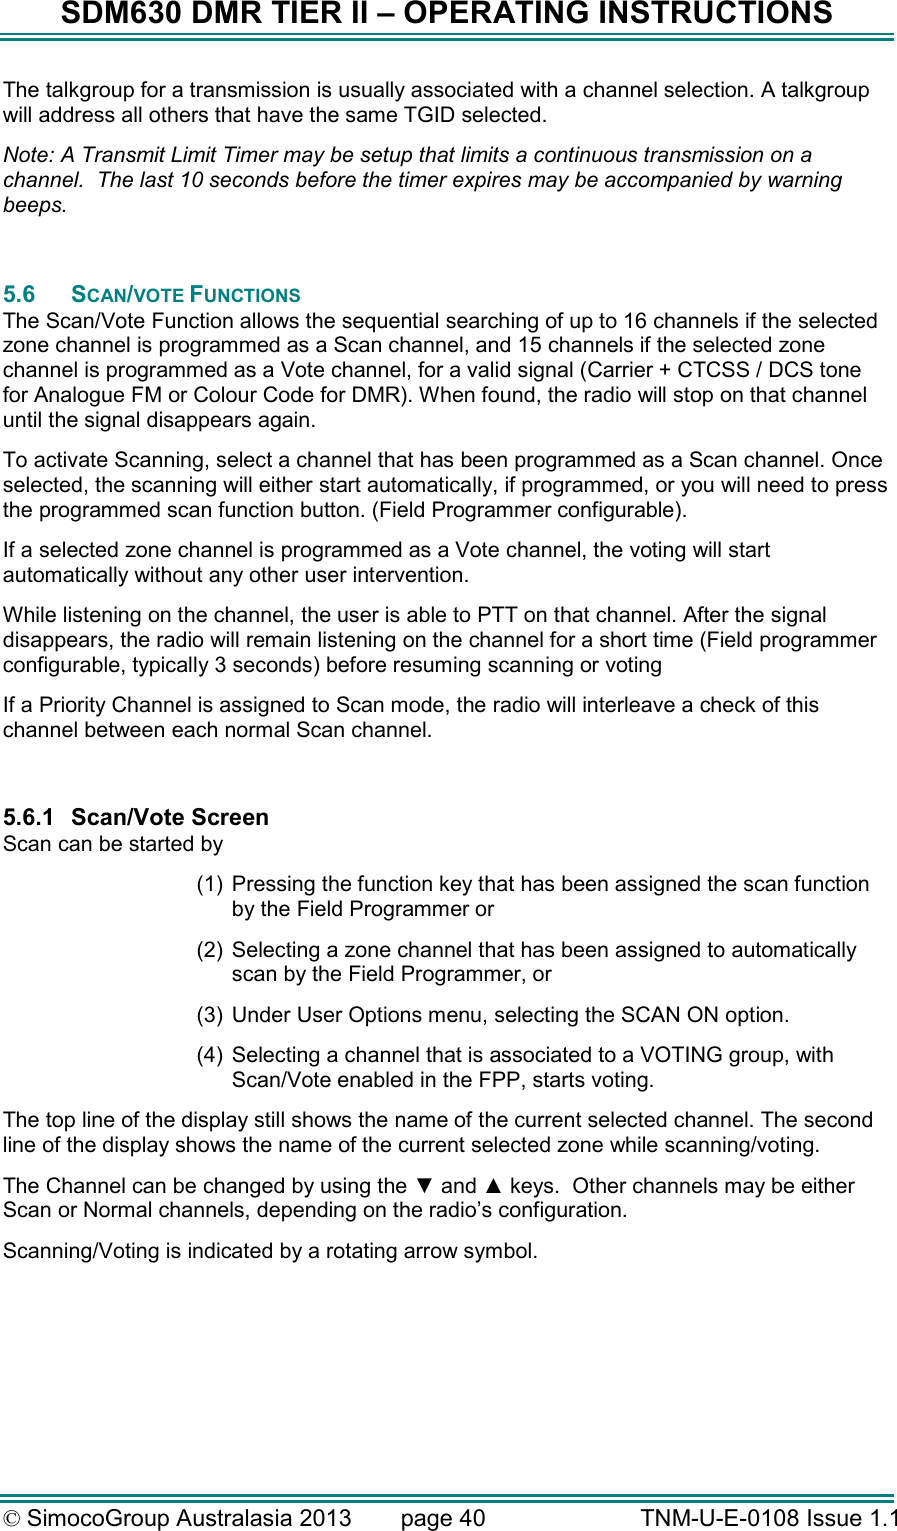 SDM630 DMR TIER II – OPERATING INSTRUCTIONS © SimocoGroup Australasia 2013   page 40   TNM-U-E-0108 Issue 1.1 The talkgroup for a transmission is usually associated with a channel selection. A talkgroup will address all others that have the same TGID selected. Note: A Transmit Limit Timer may be setup that limits a continuous transmission on a channel.  The last 10 seconds before the timer expires may be accompanied by warning beeps.  5.6  SCAN/VOTE FUNCTIONS The Scan/Vote Function allows the sequential searching of up to 16 channels if the selected zone channel is programmed as a Scan channel, and 15 channels if the selected zone channel is programmed as a Vote channel, for a valid signal (Carrier + CTCSS / DCS tone for Analogue FM or Colour Code for DMR). When found, the radio will stop on that channel until the signal disappears again. To activate Scanning, select a channel that has been programmed as a Scan channel. Once selected, the scanning will either start automatically, if programmed, or you will need to press the programmed scan function button. (Field Programmer configurable).  If a selected zone channel is programmed as a Vote channel, the voting will start automatically without any other user intervention.  While listening on the channel, the user is able to PTT on that channel. After the signal disappears, the radio will remain listening on the channel for a short time (Field programmer configurable, typically 3 seconds) before resuming scanning or voting If a Priority Channel is assigned to Scan mode, the radio will interleave a check of this channel between each normal Scan channel.  5.6.1  Scan/Vote Screen Scan can be started by  (1)  Pressing the function key that has been assigned the scan function by the Field Programmer or (2)  Selecting a zone channel that has been assigned to automatically scan by the Field Programmer, or (3)  Under User Options menu, selecting the SCAN ON option. (4)  Selecting a channel that is associated to a VOTING group, with Scan/Vote enabled in the FPP, starts voting. The top line of the display still shows the name of the current selected channel. The second line of the display shows the name of the current selected zone while scanning/voting.   The Channel can be changed by using the ▼ and ▲ keys.  Other channels may be either Scan or Normal channels, depending on the radio’s configuration. Scanning/Voting is indicated by a rotating arrow symbol.  